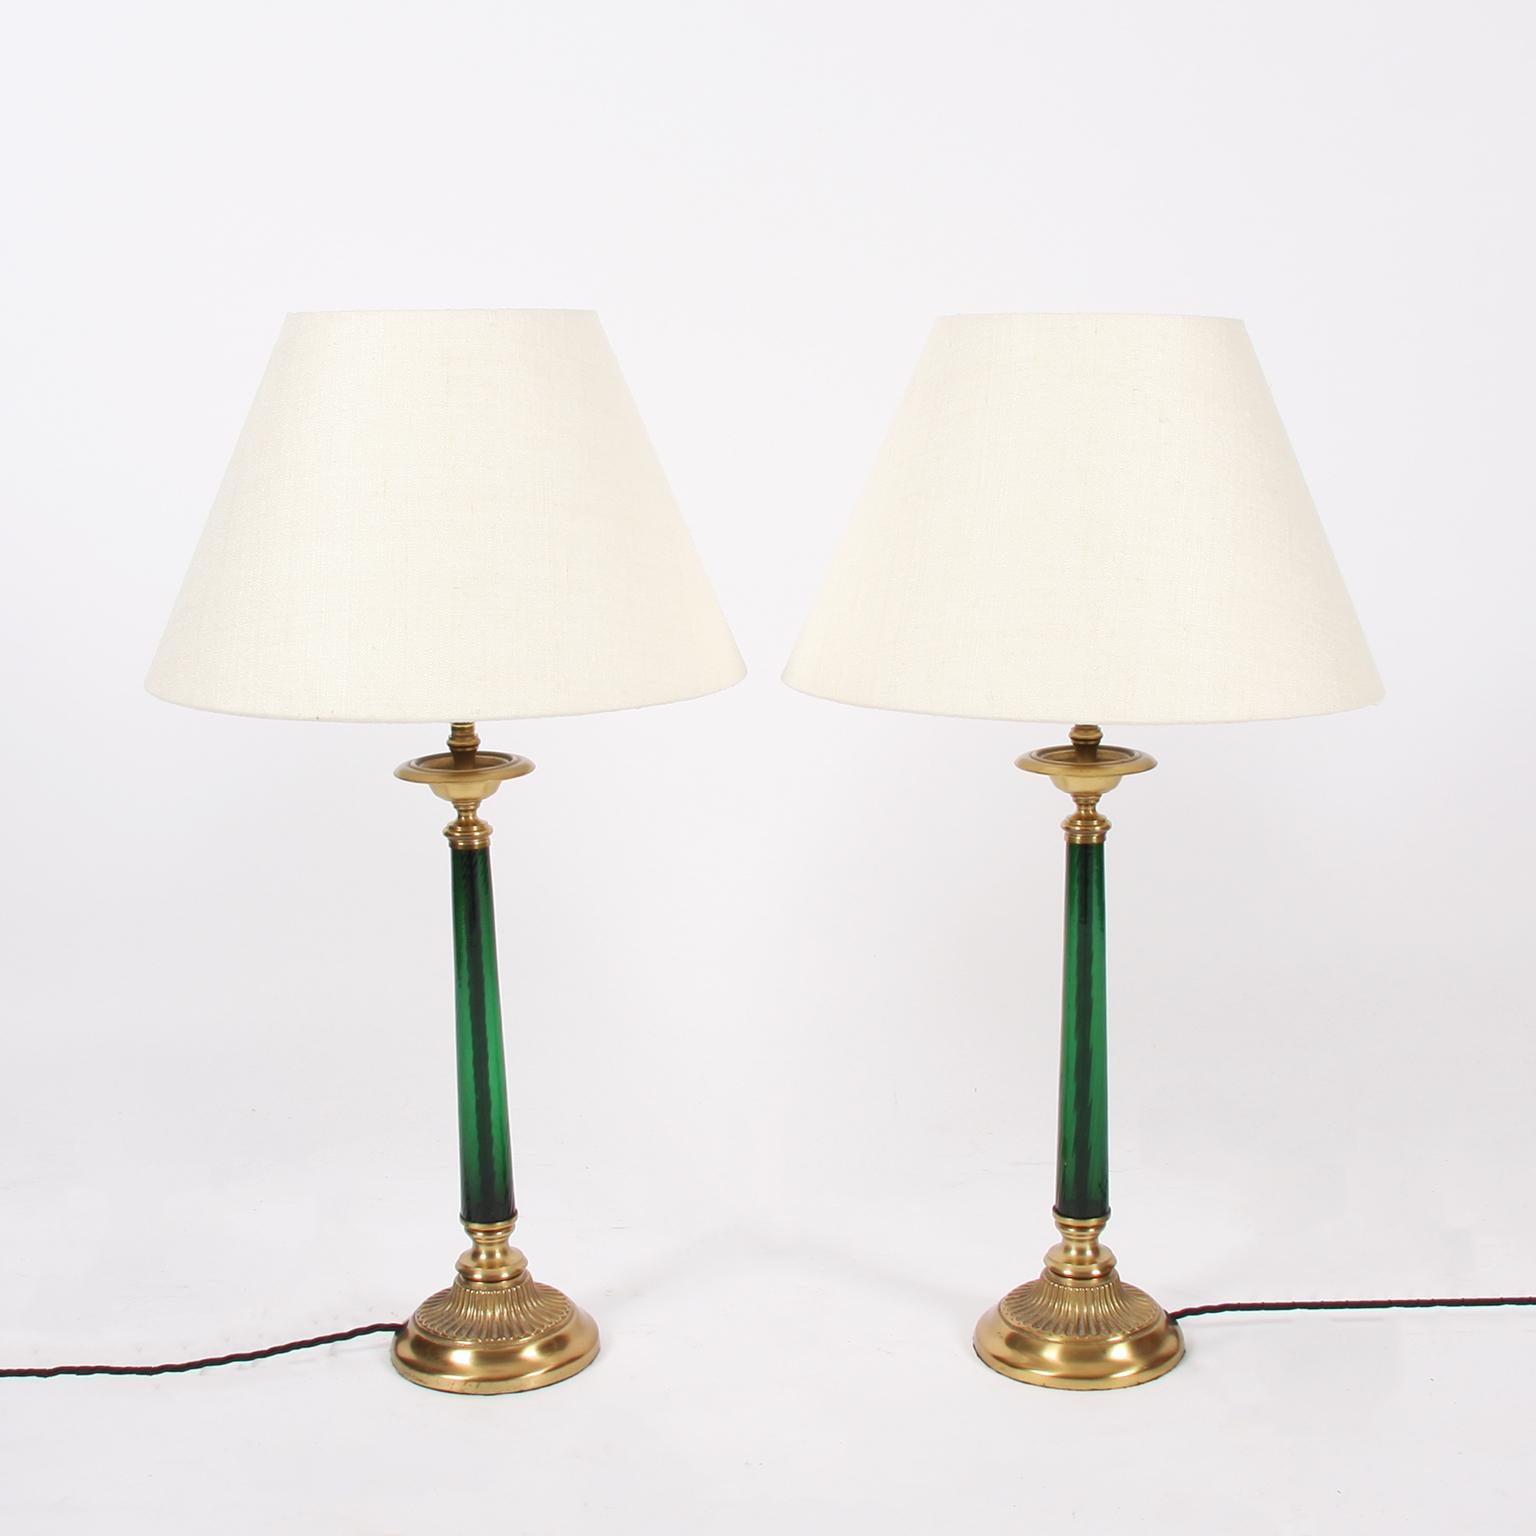 French, circa 1970.

A lovely pair of green glass, and brass, table lamps. With beautiful detail to the base. 

Rewired and PAT tested. 

Pictured with a pair of cream linen shades.
 